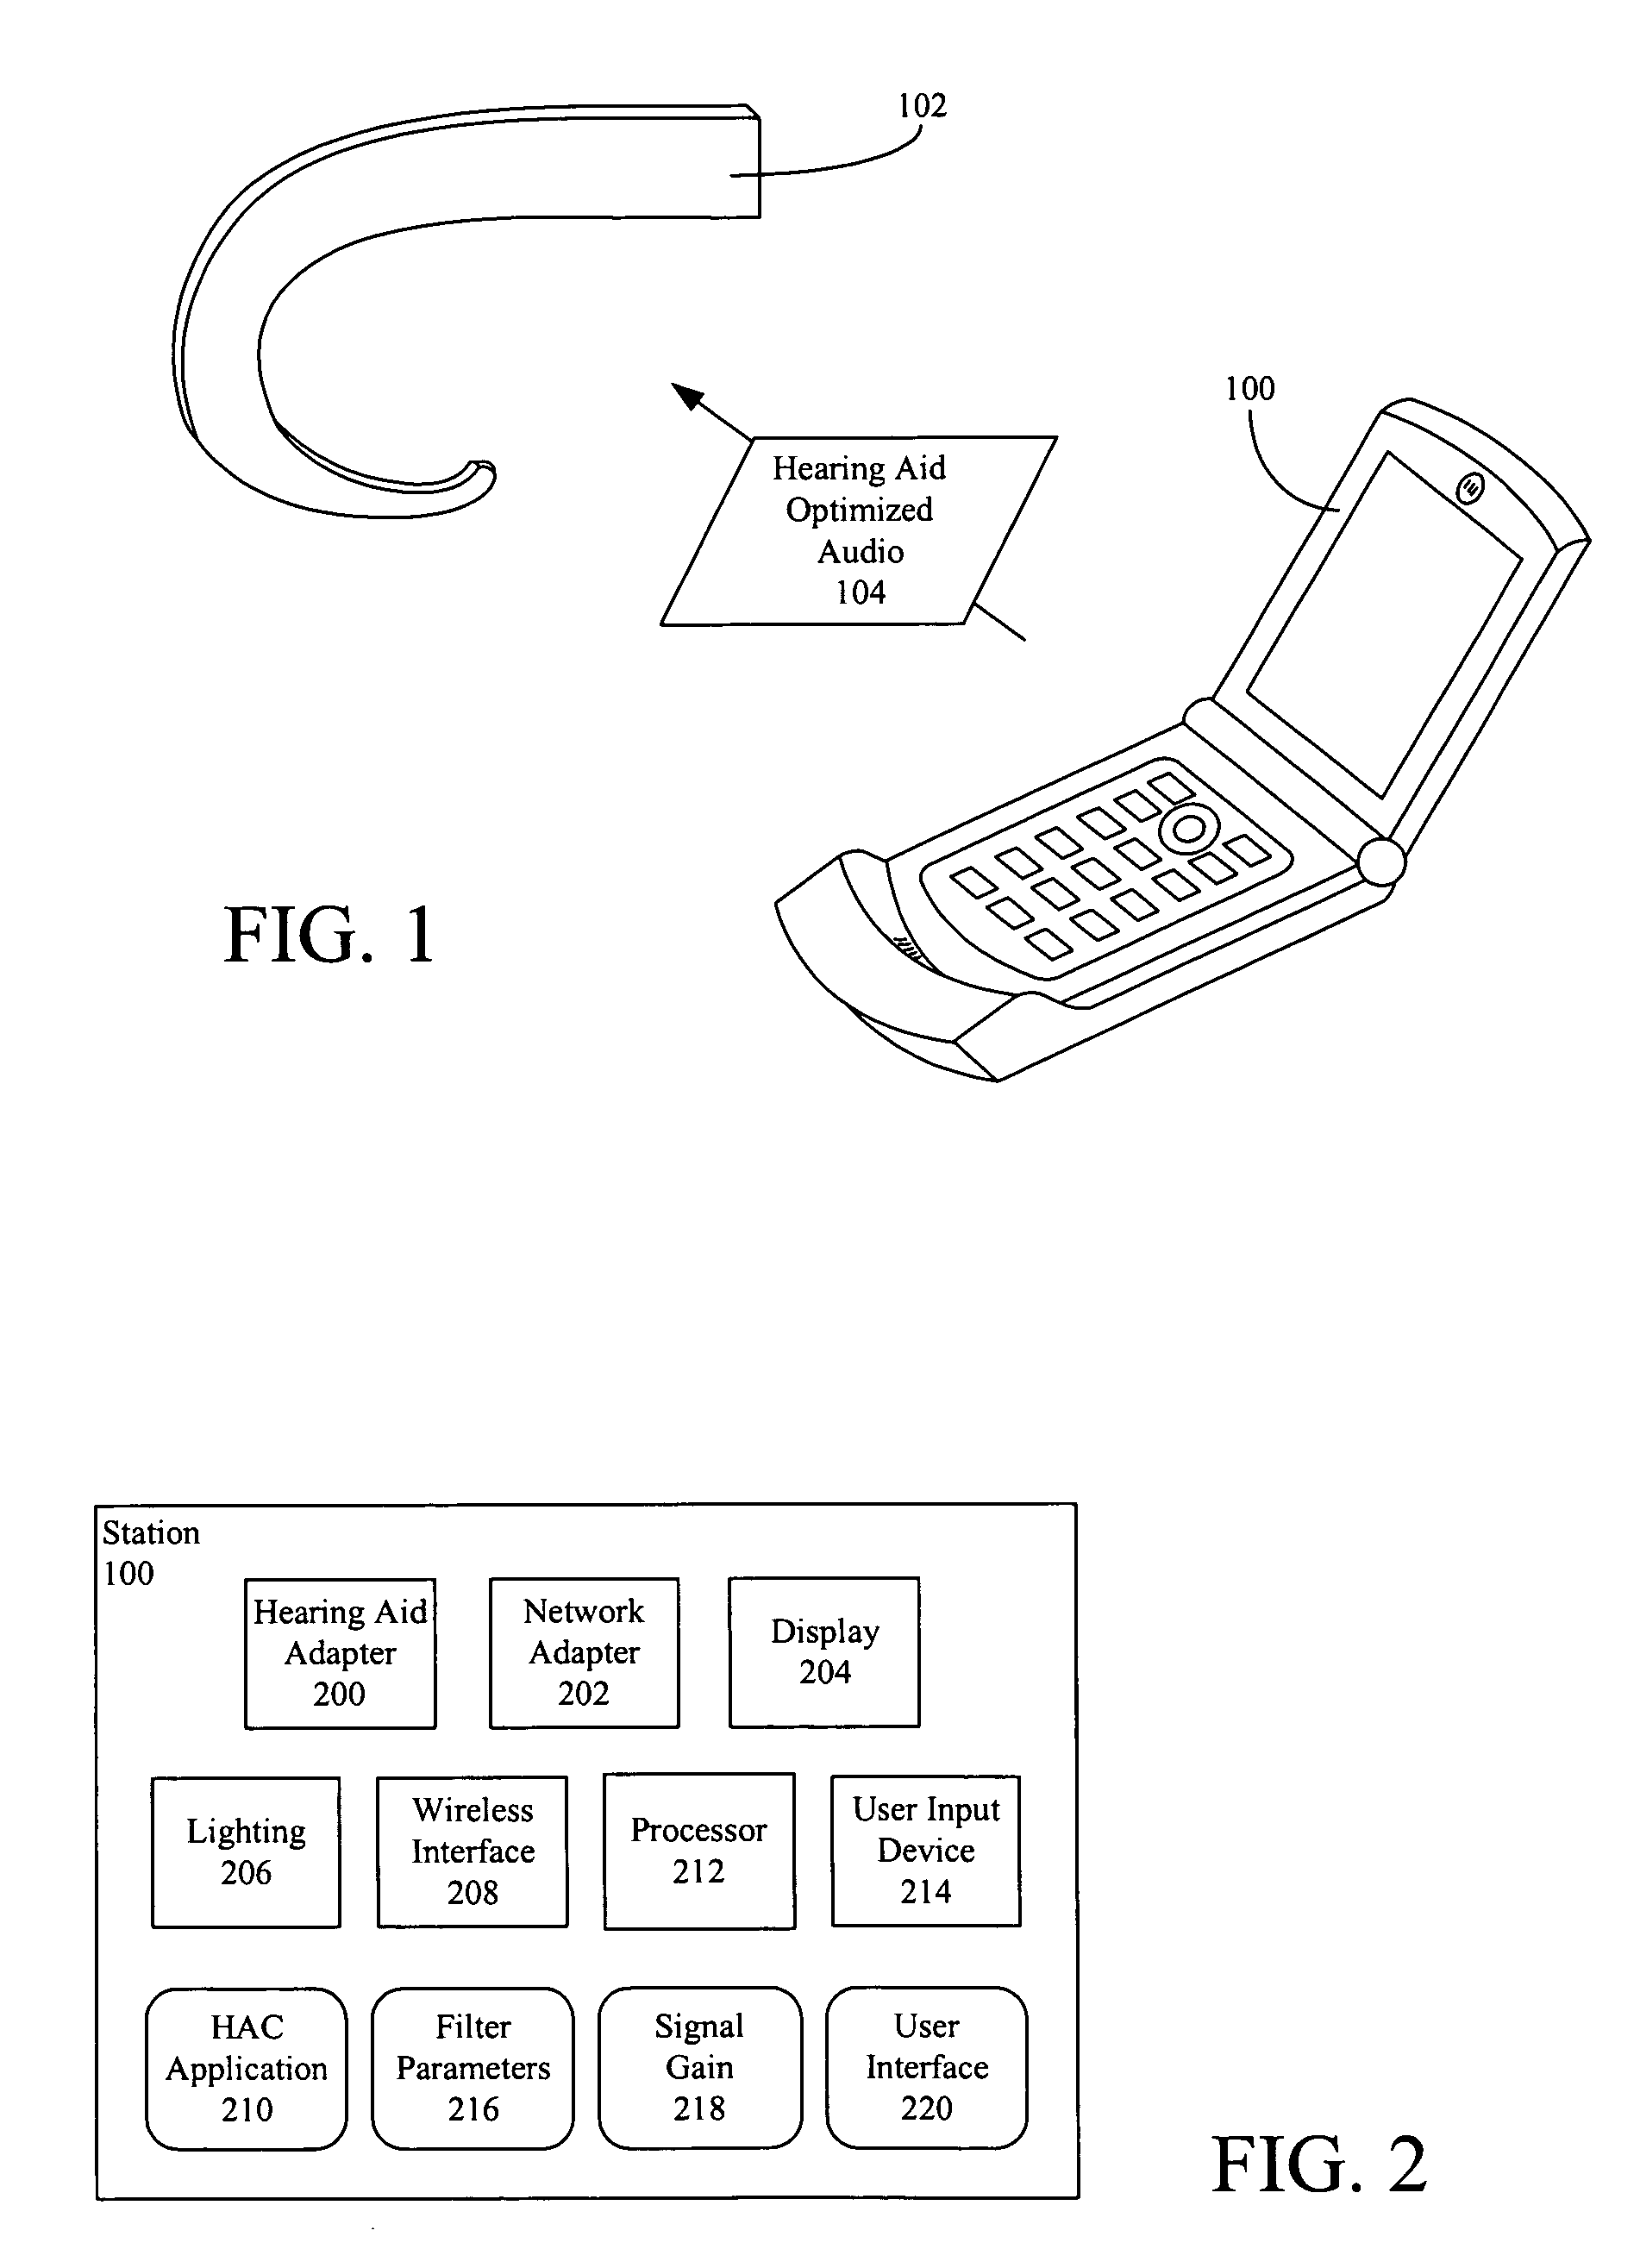 Hearing aid compatibility mode switching for a mobile station